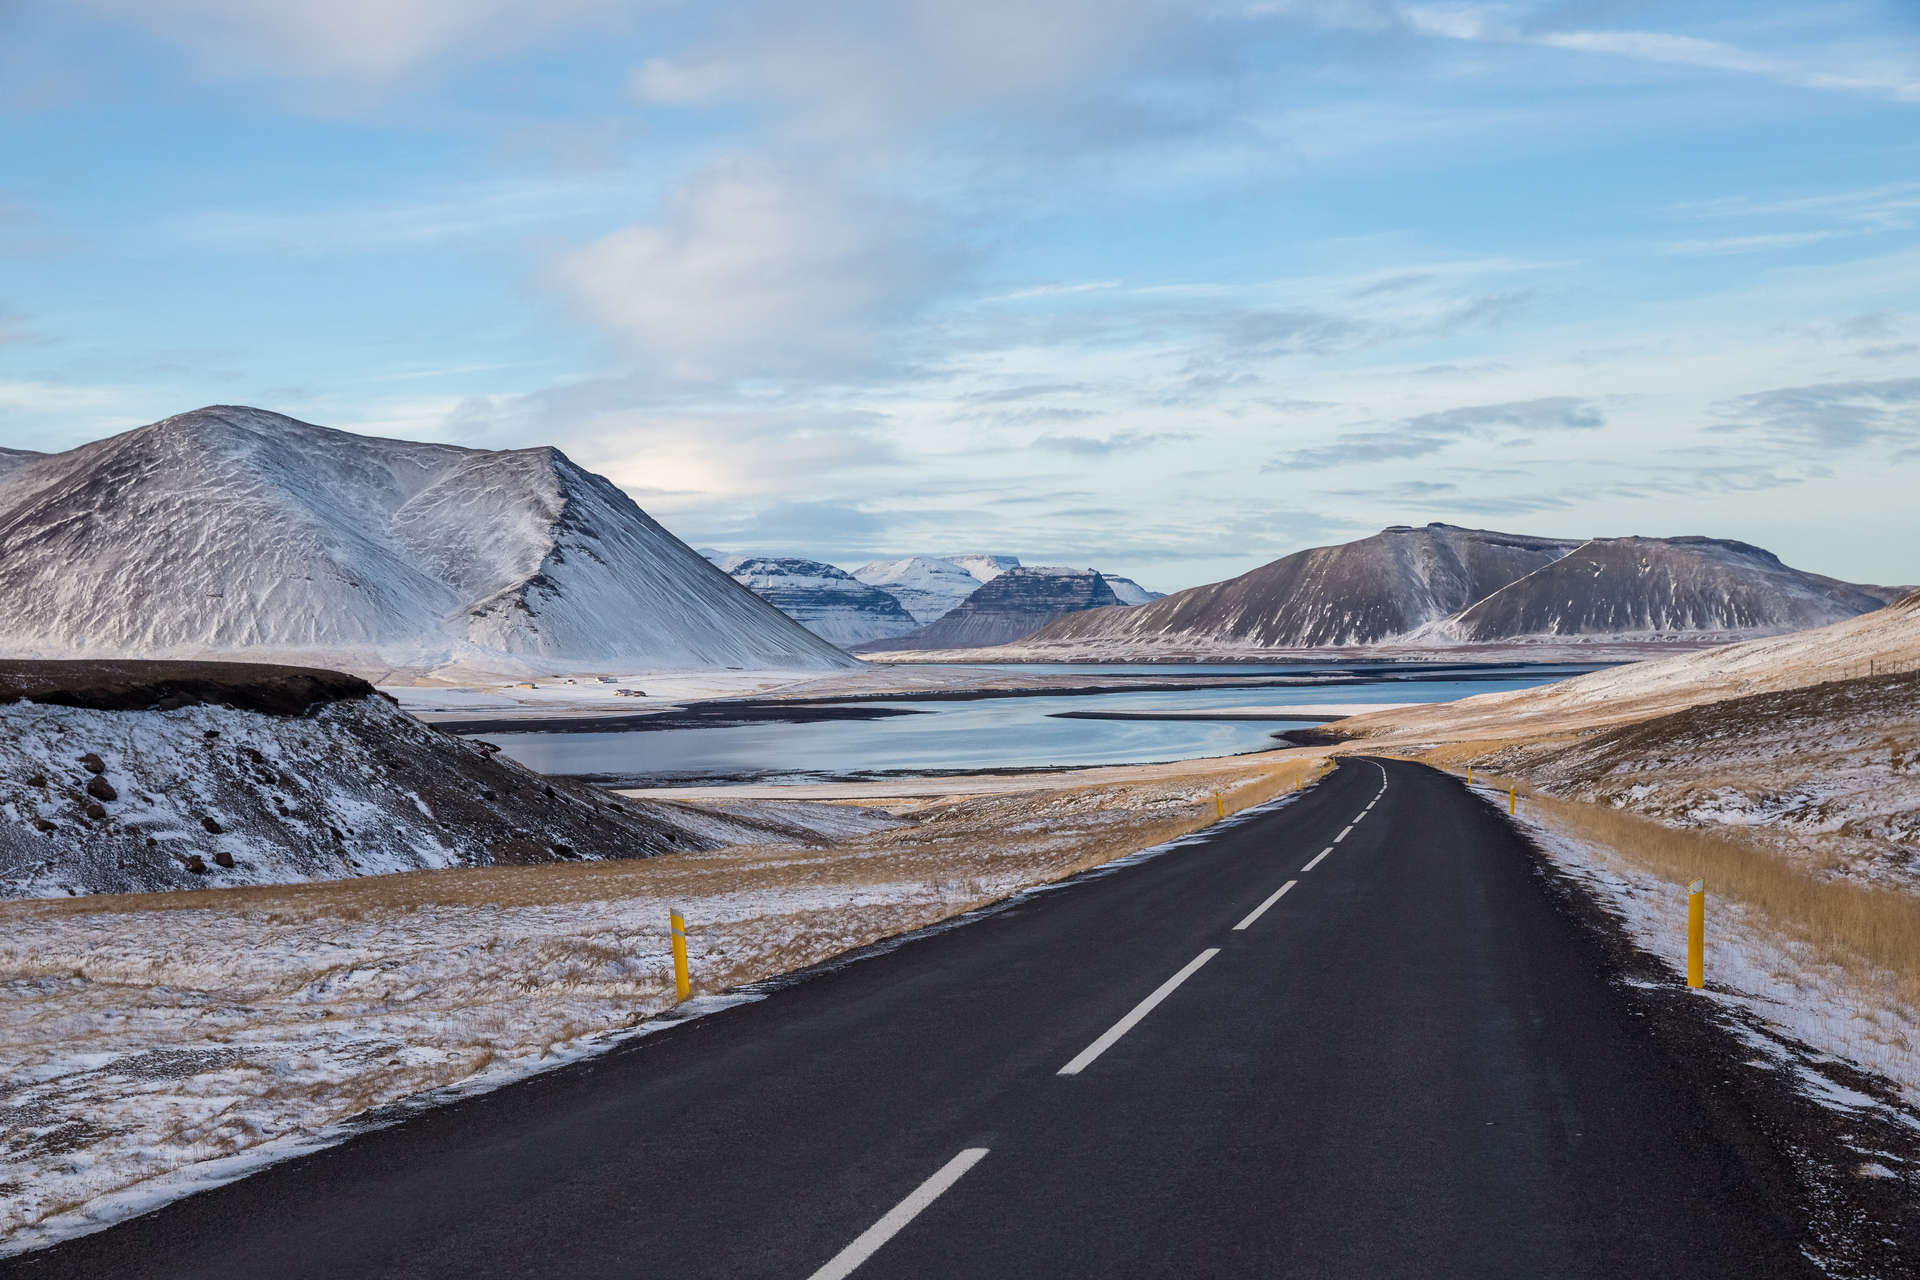 An Iceland road trip takes you through some of the most startlingly beautiful landscapes on Earth